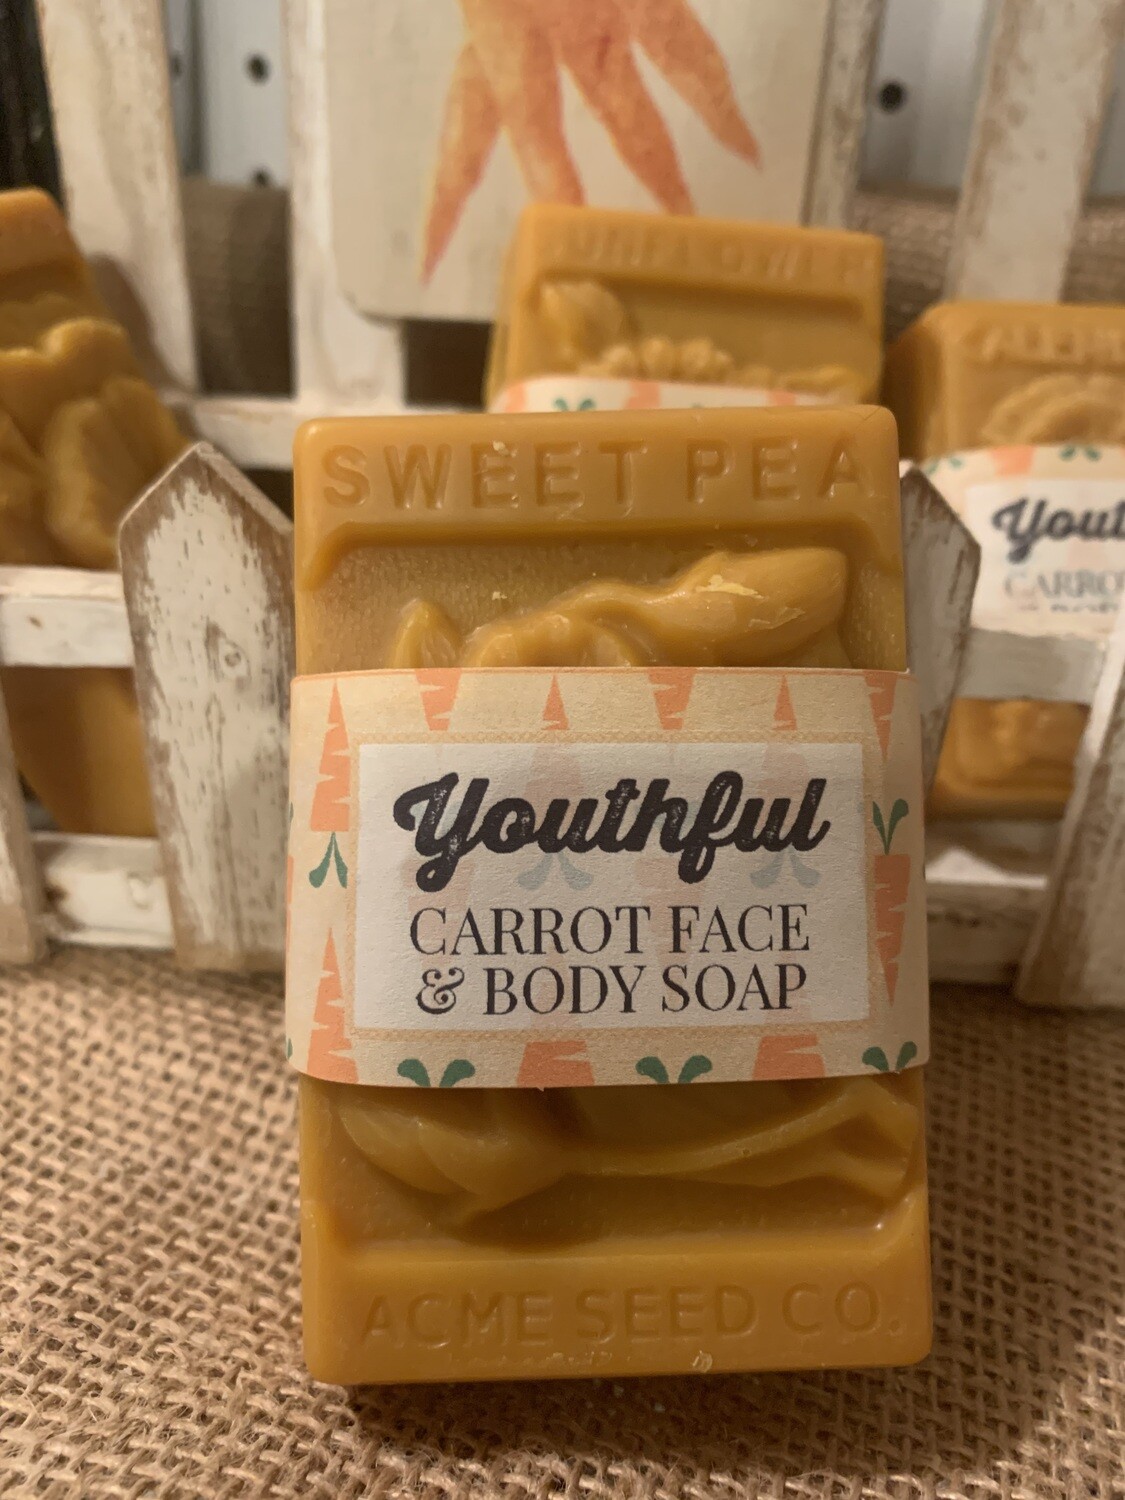 Youthful & Brightening Carrot Face and Body Soap